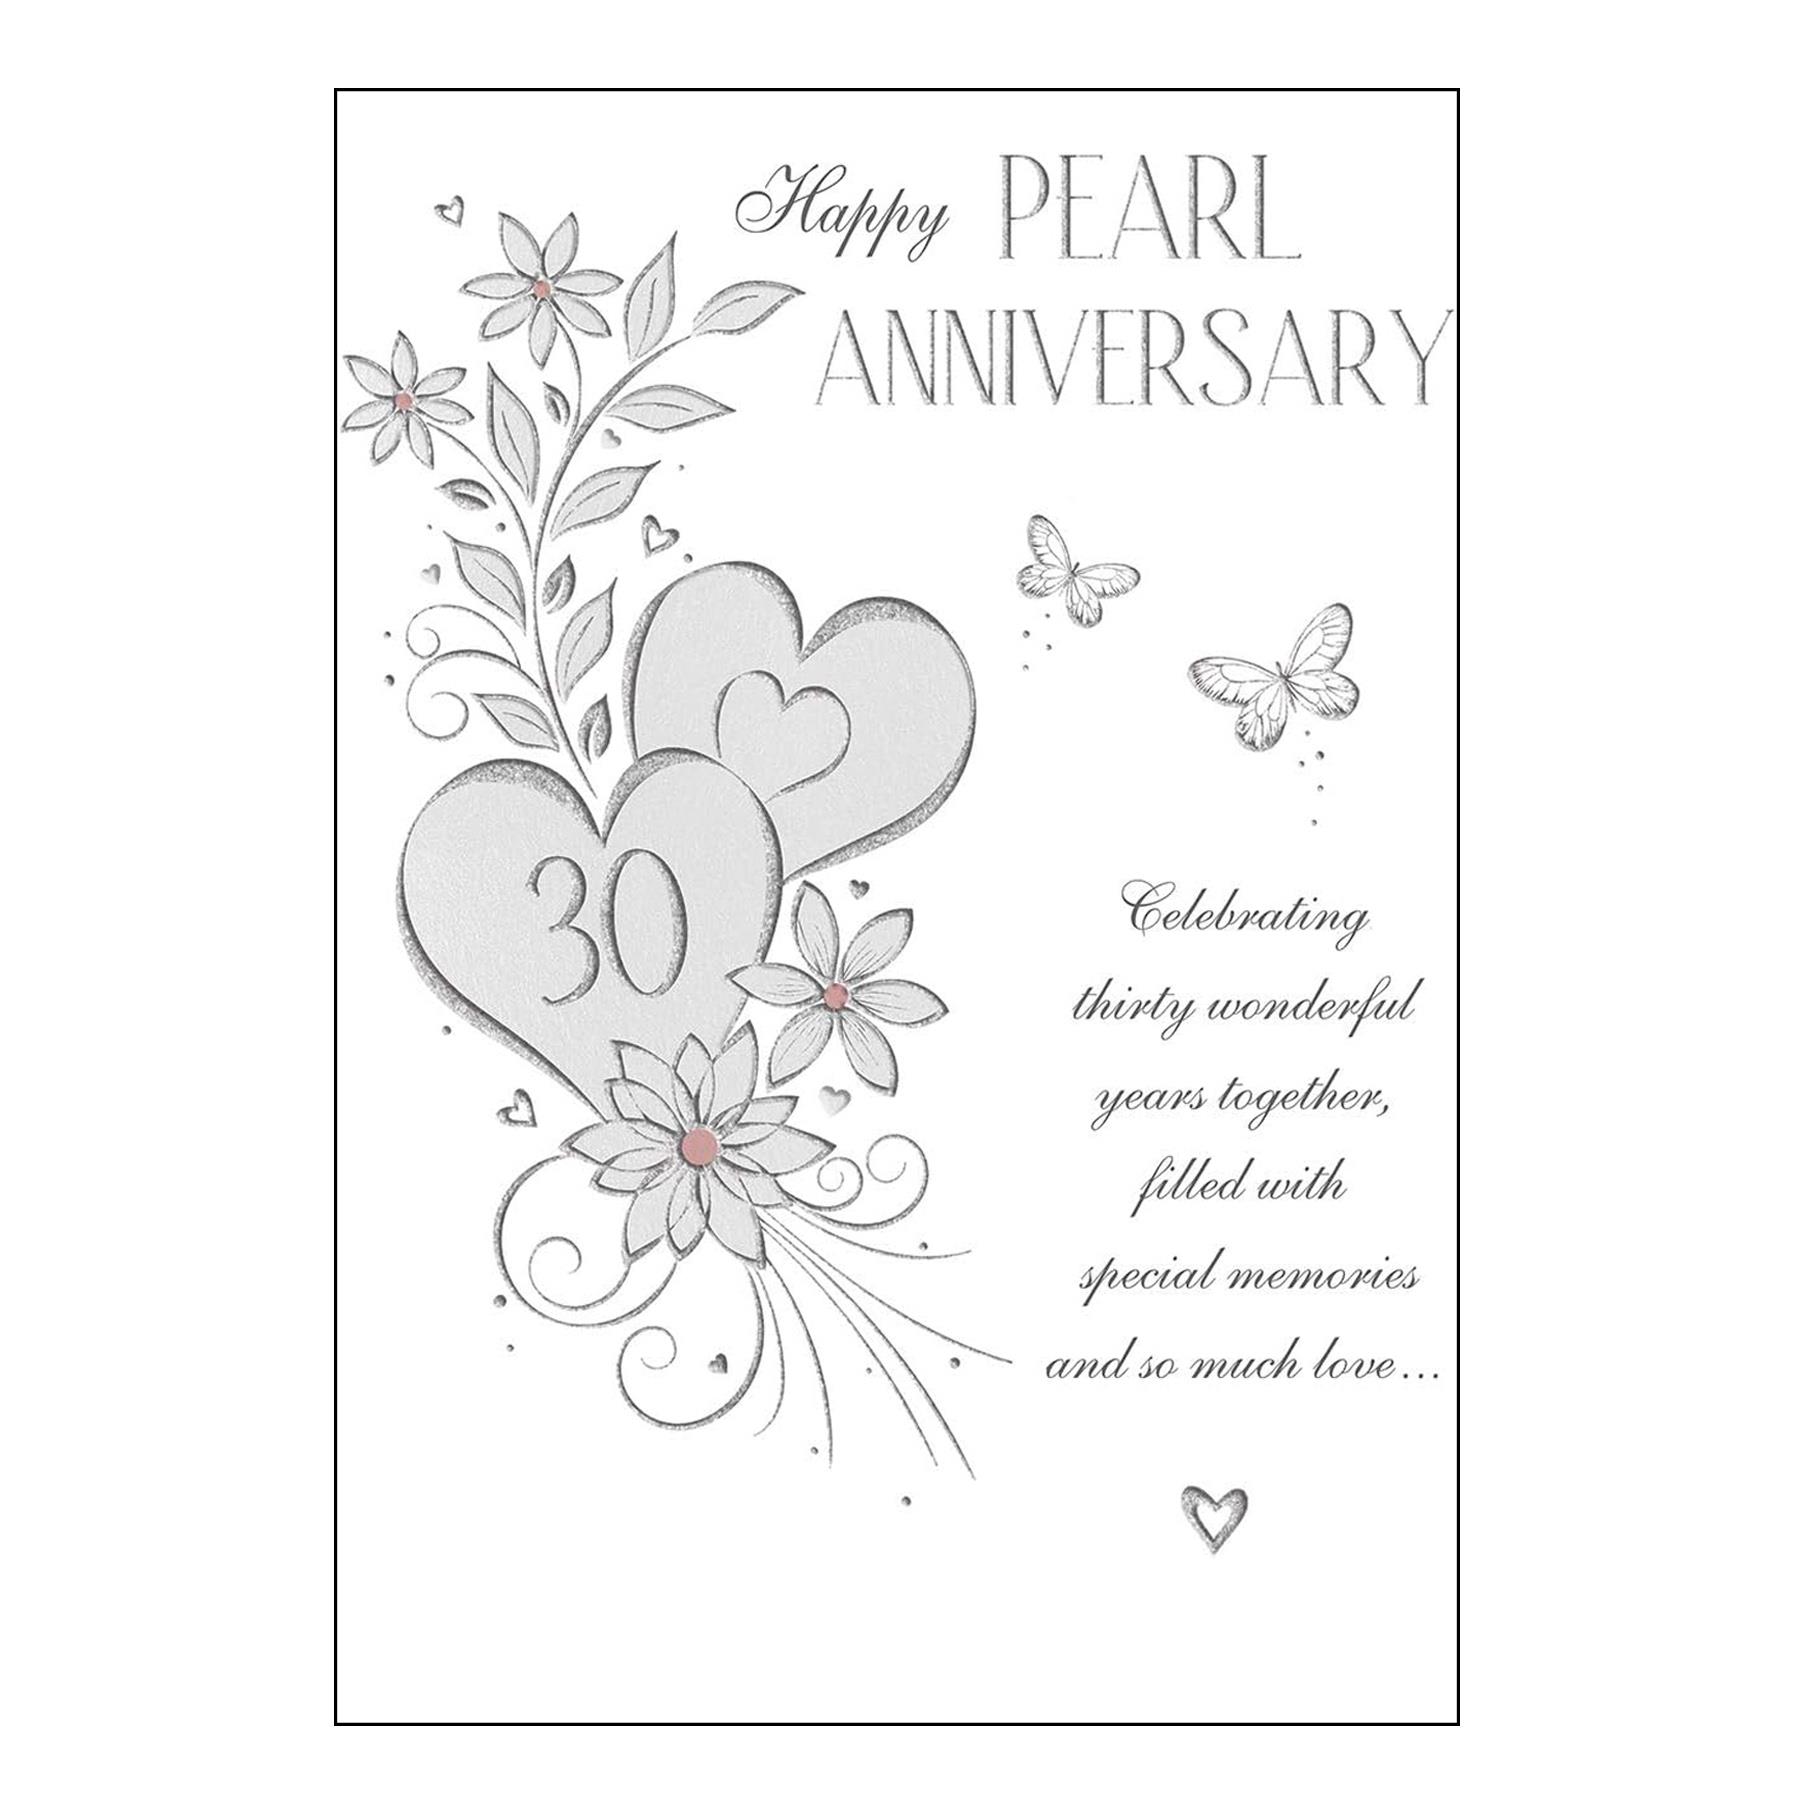 Happy Pearl Anniversary Card with Foil Detail, Hearts, Butterflies and White Envelope